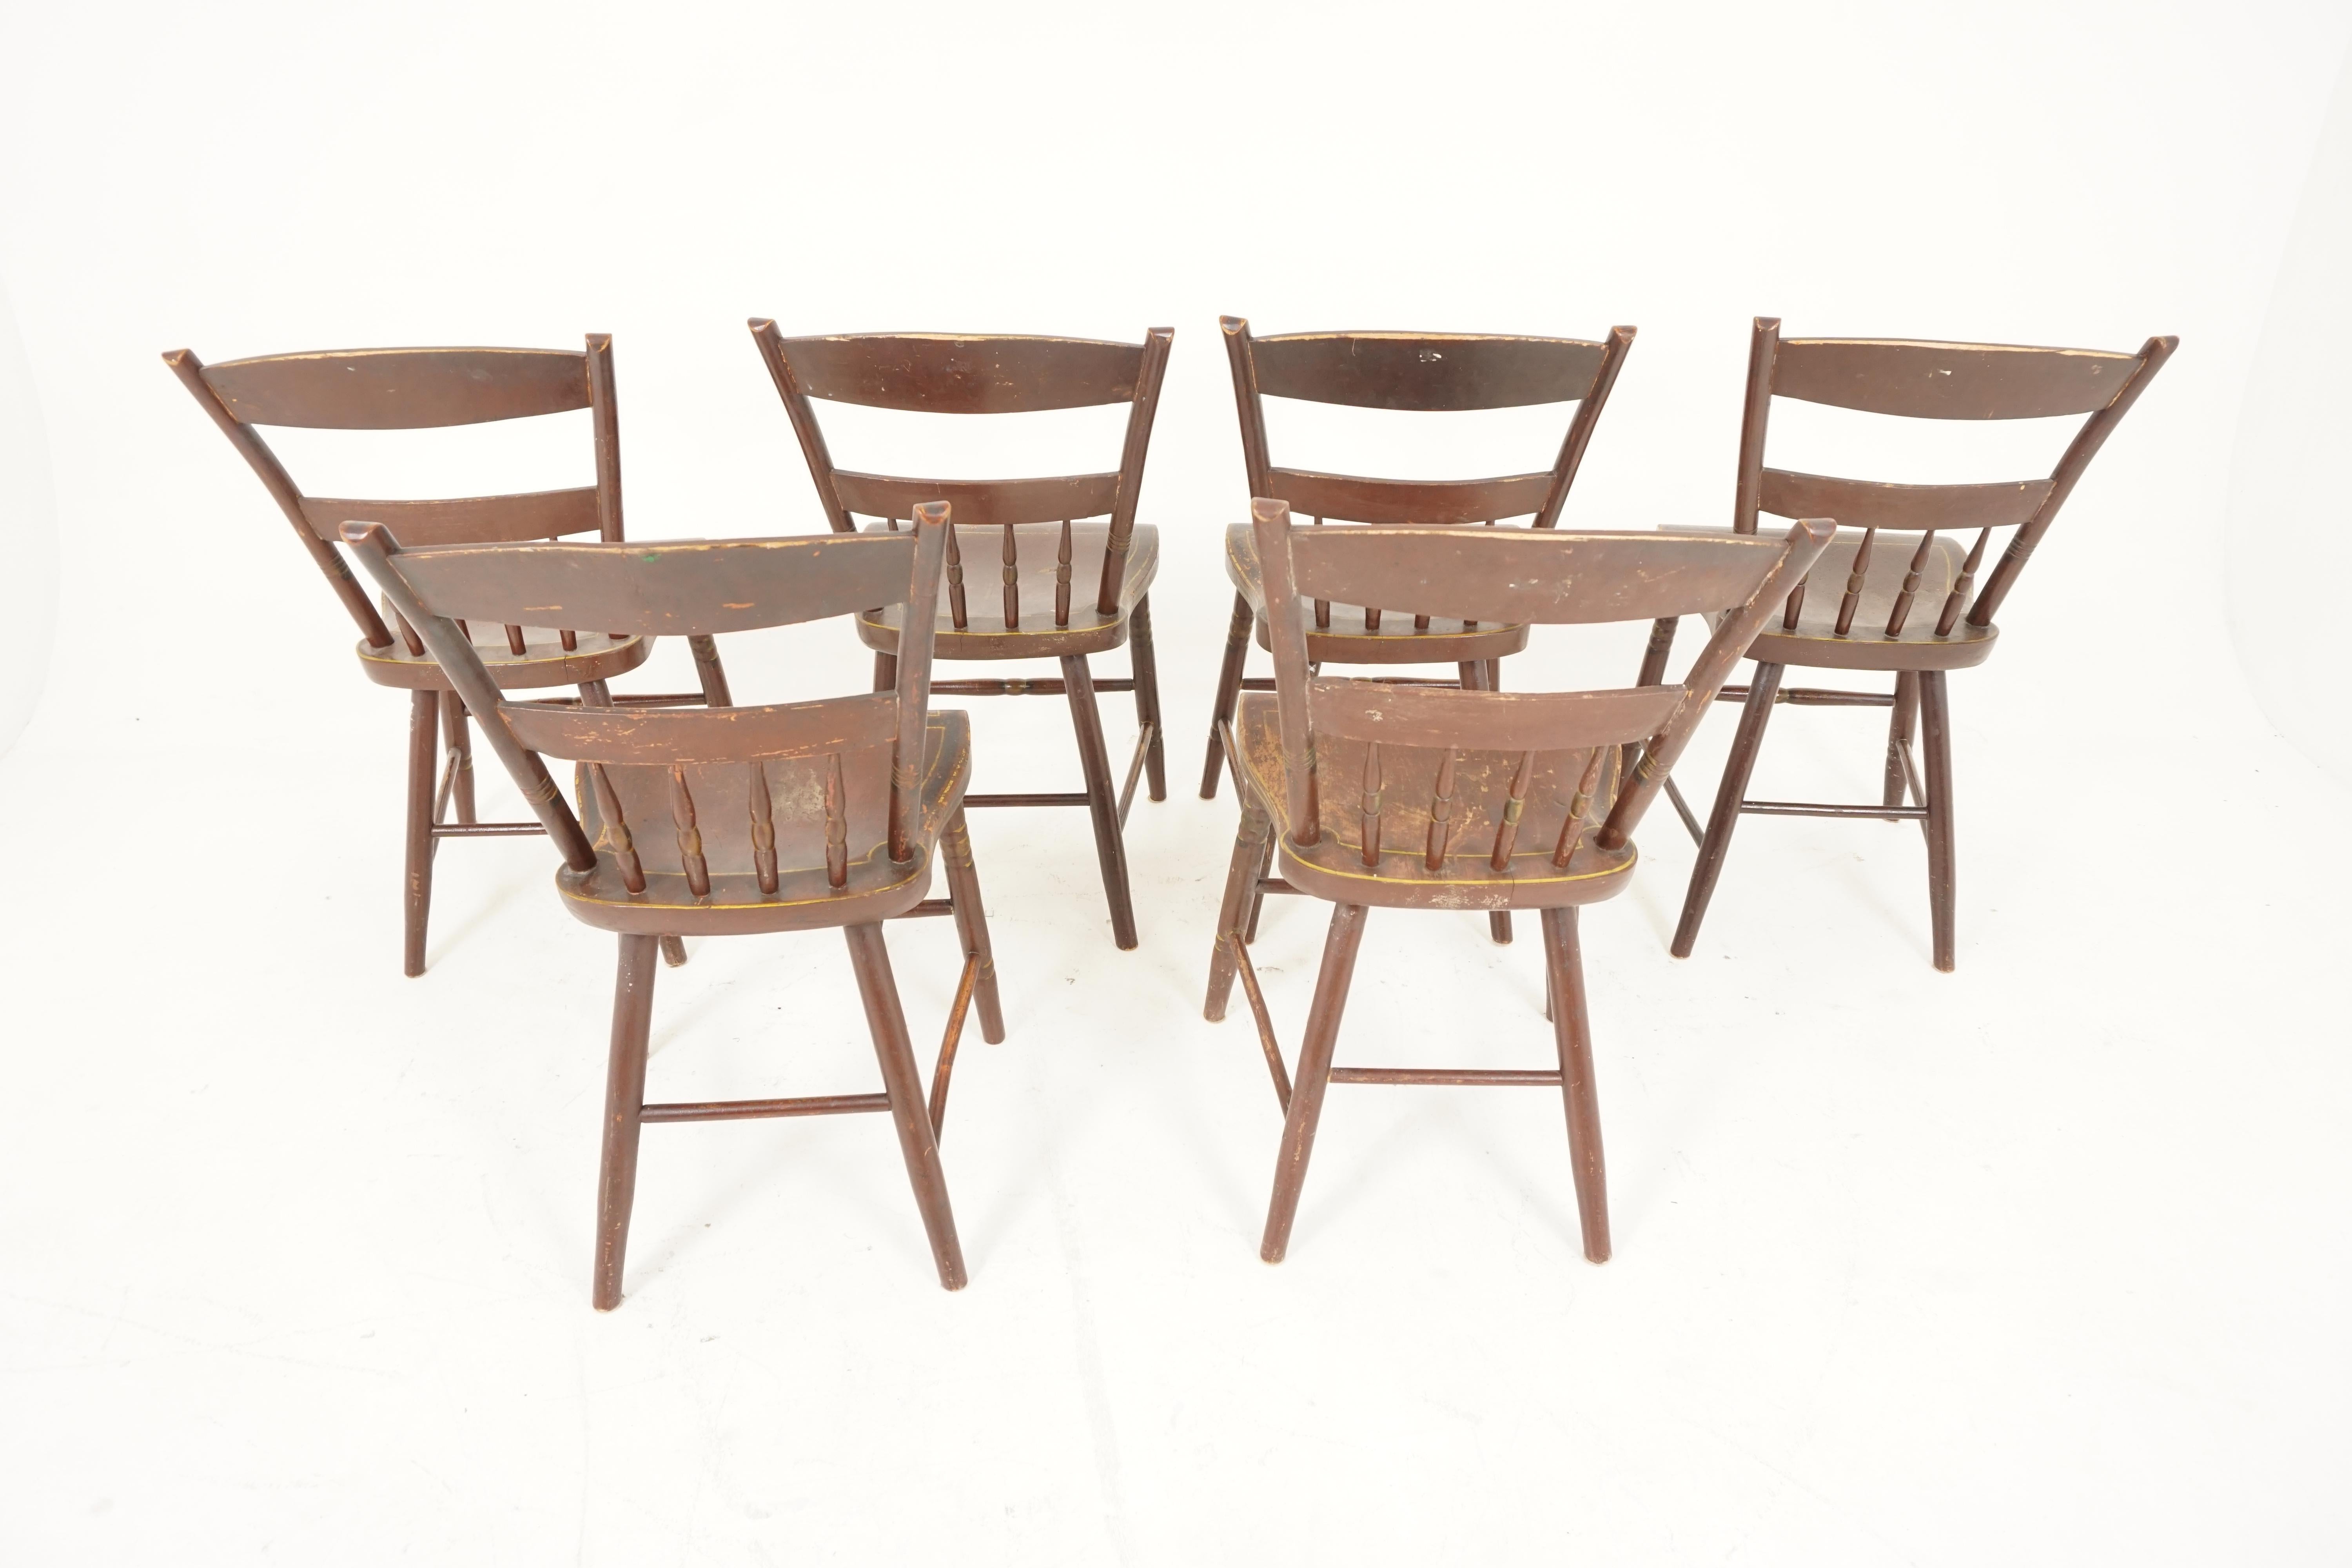 Hardwood Antique Chairs, Set of 6, Pennsylvania Dutch Painted Plank Bottom Chairs, 1890s